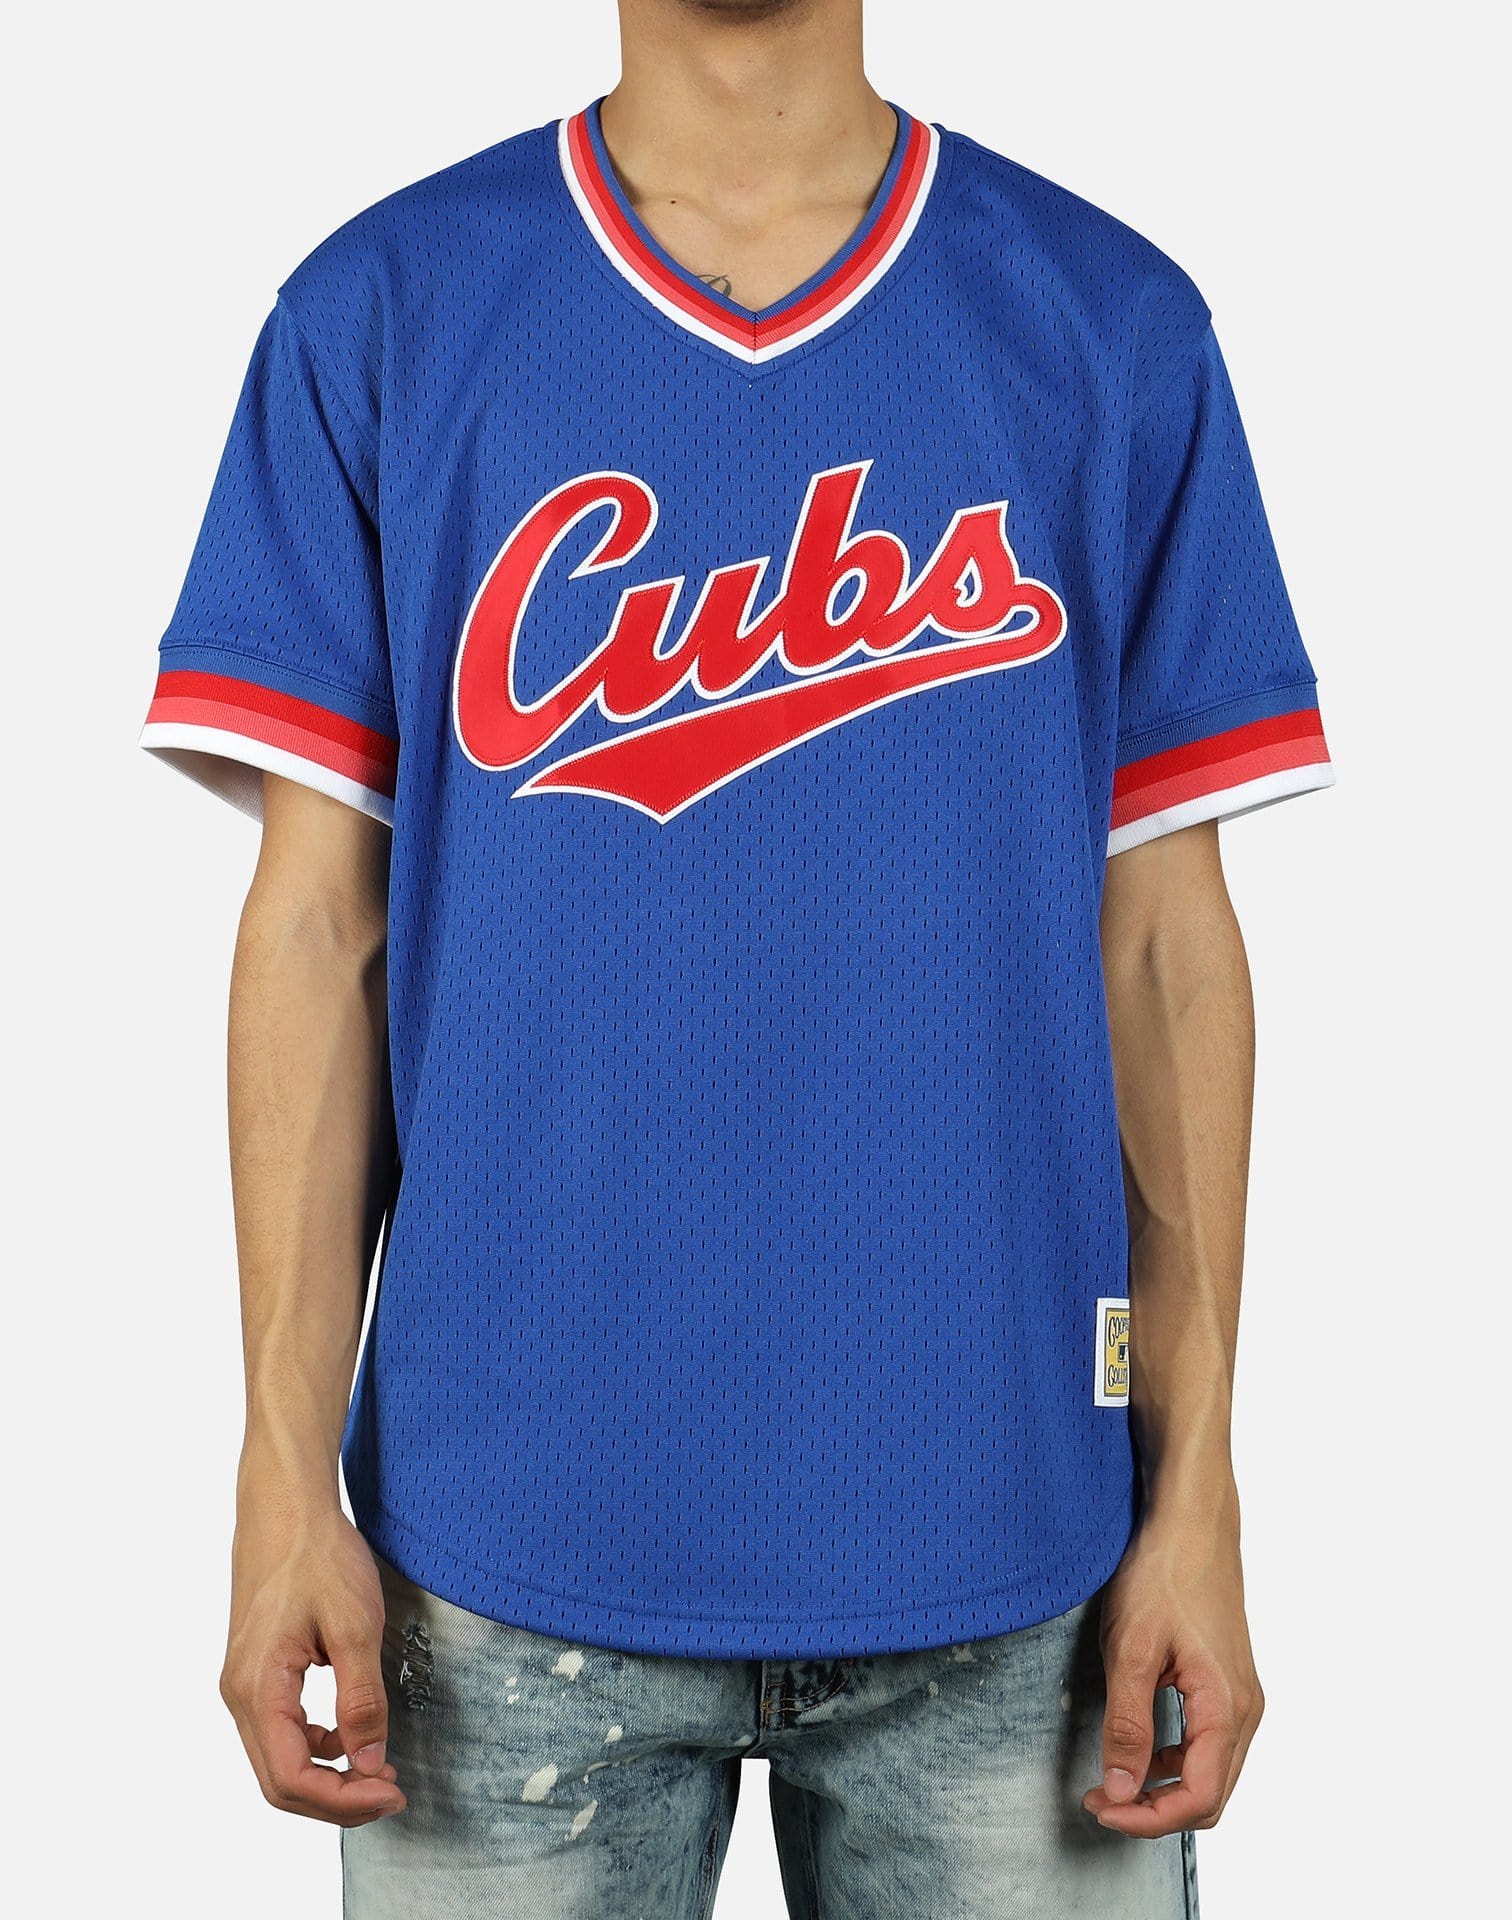 Mitchell & Ness MLB CHICAGO CUBS MESH V-NECK JERSEY – DTLR